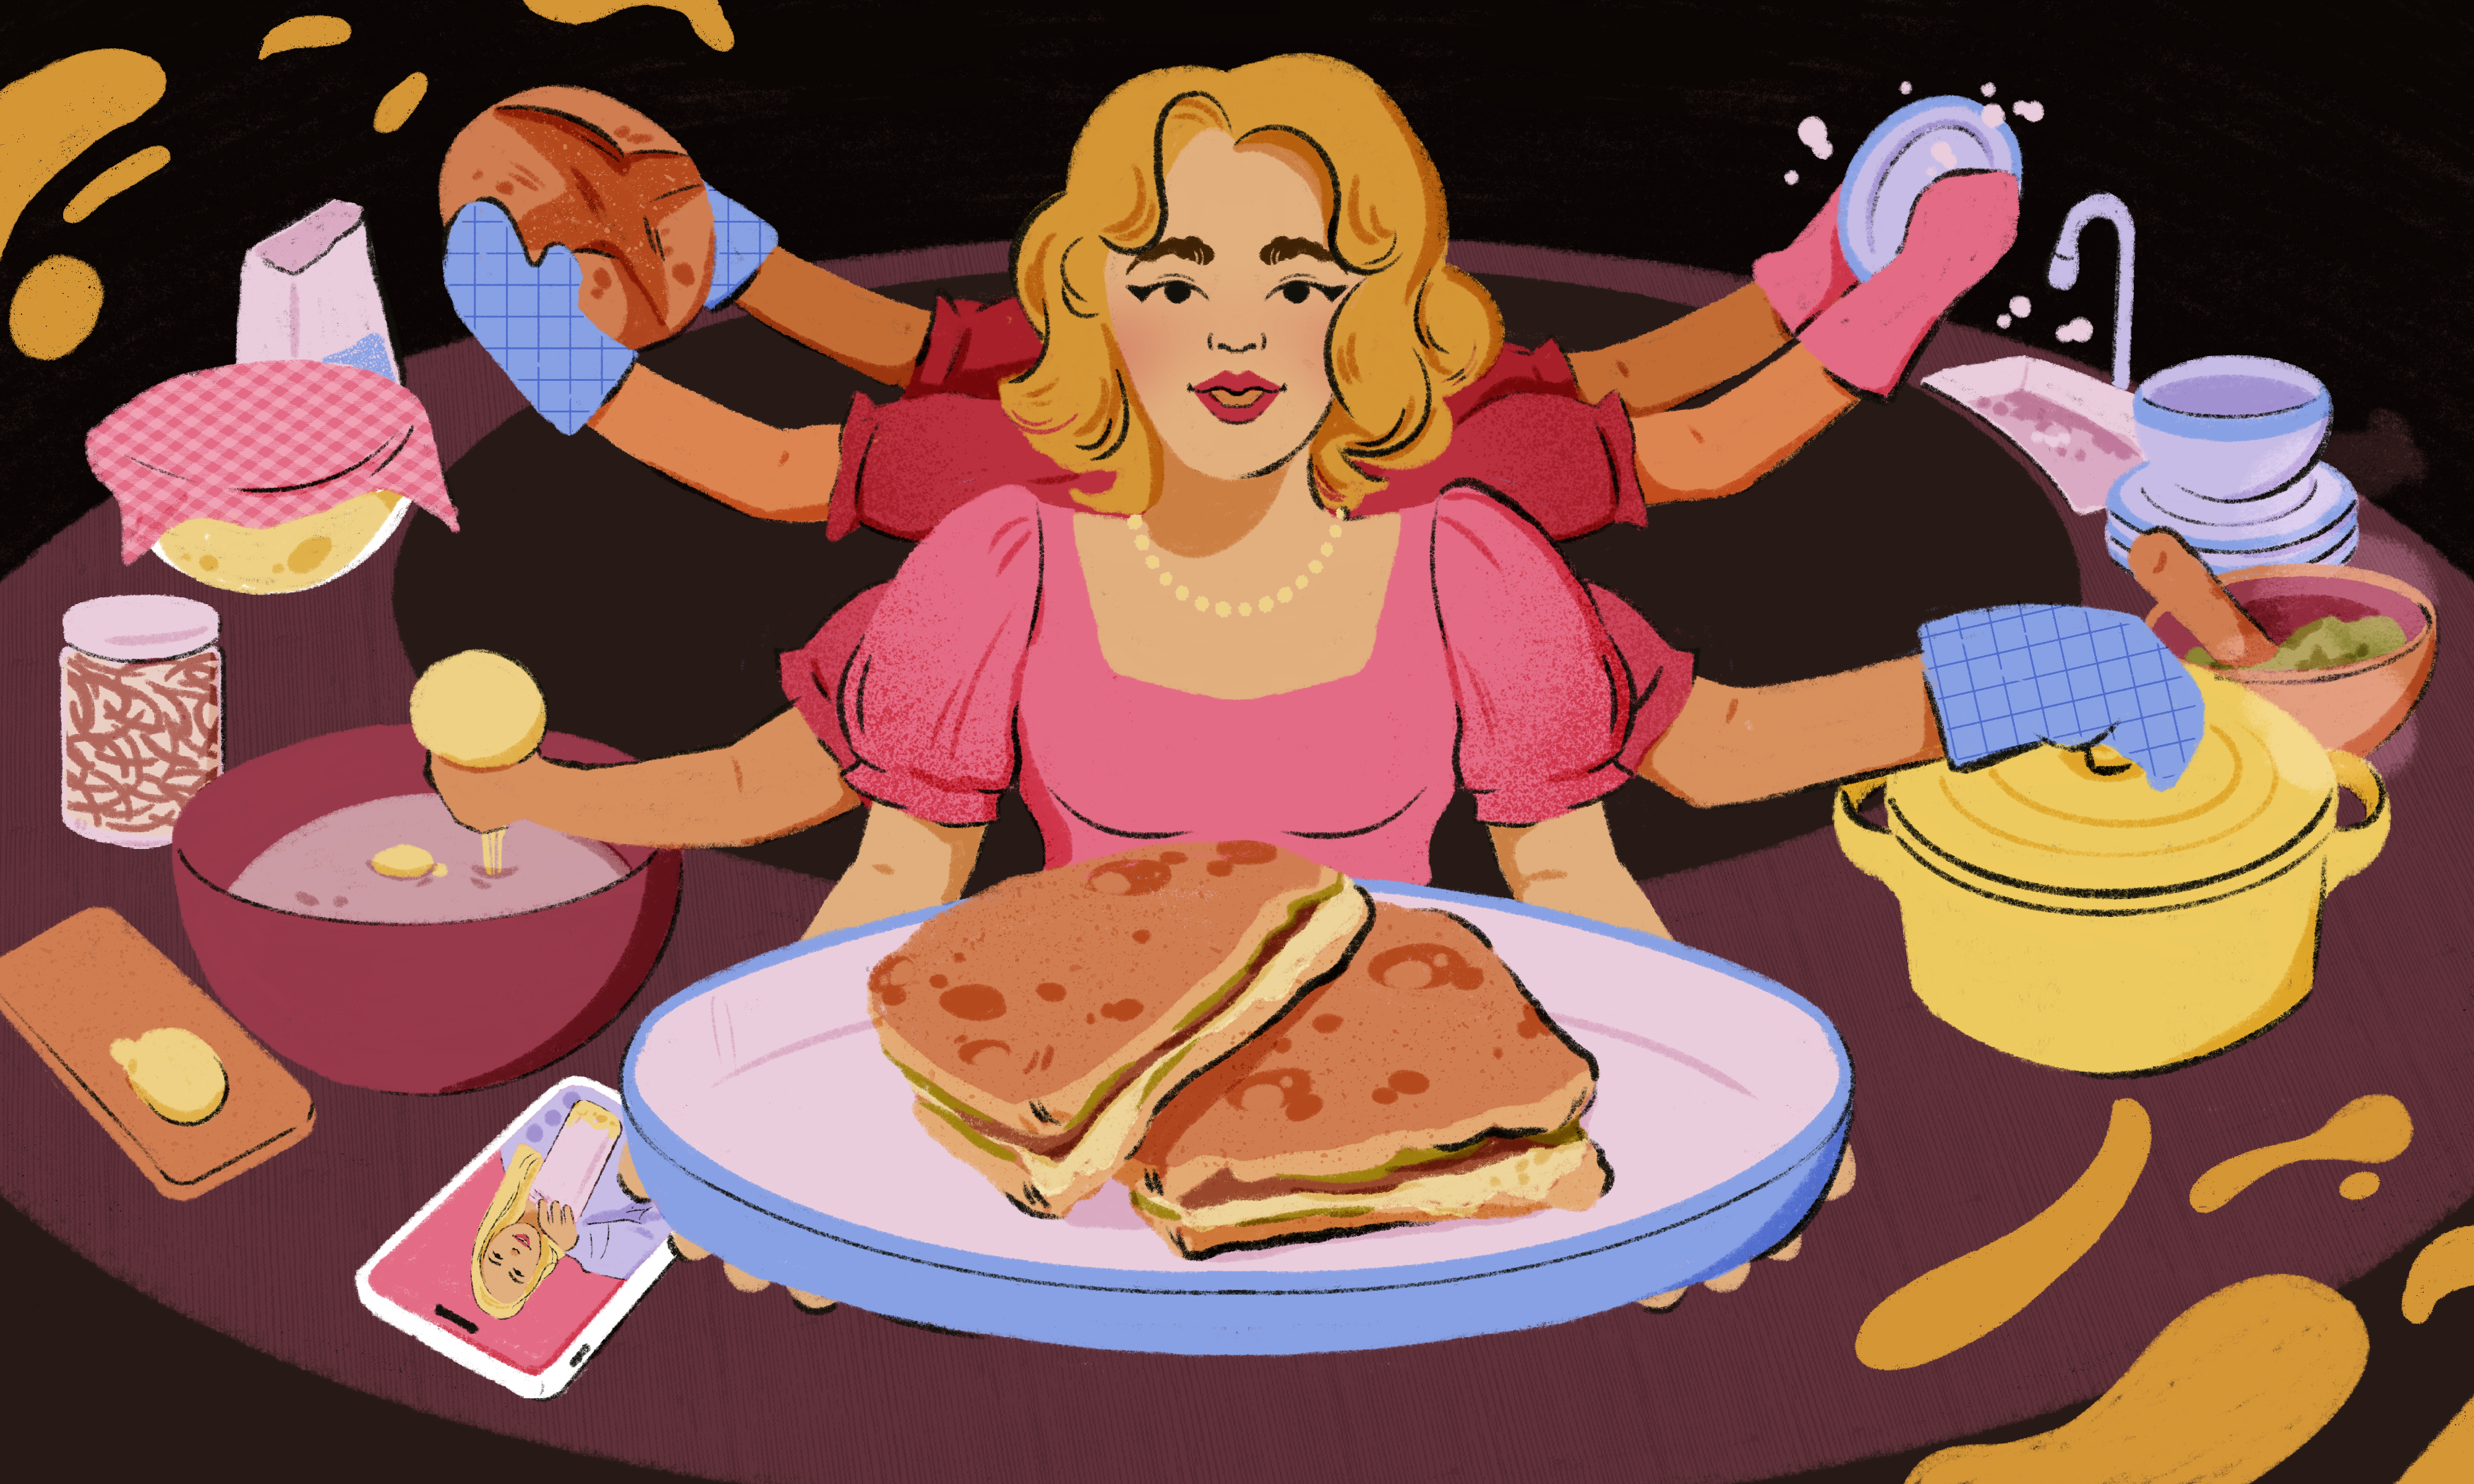 A woman wearing a dress and pearls uses her eight arms to clean, wash the dishes, bake, cook, and hold a plate with a grilled cheese sandwich. Illustration.